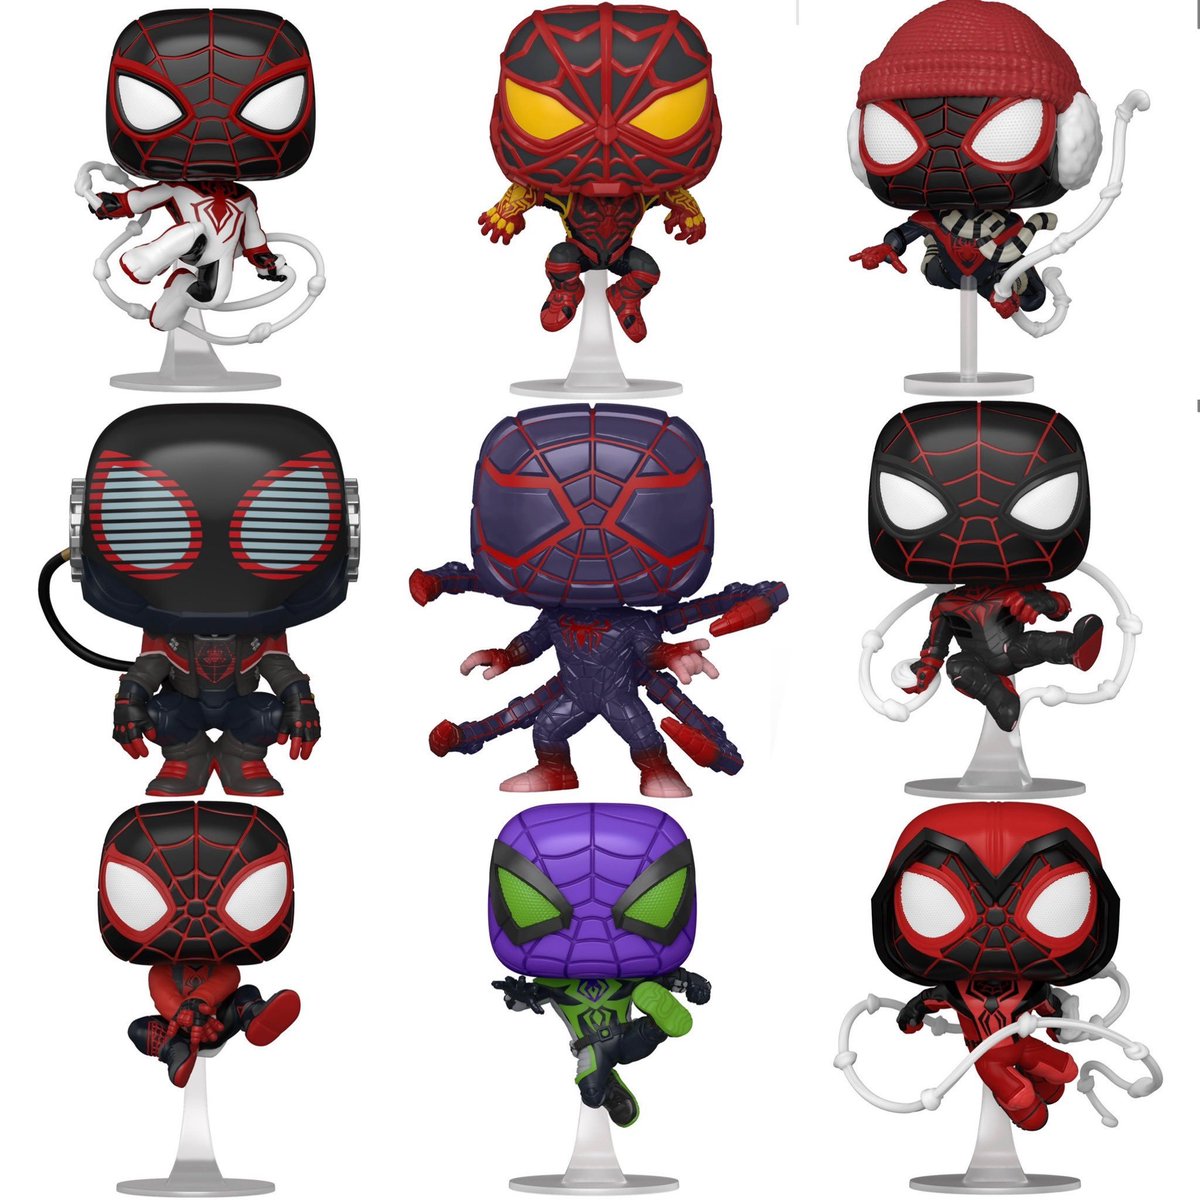 RT @EARTH_1610_616: Here are all the Funko Pops for Miles Morales from Spider-Man : Miles Morales https://t.co/IQSbzCbTo6